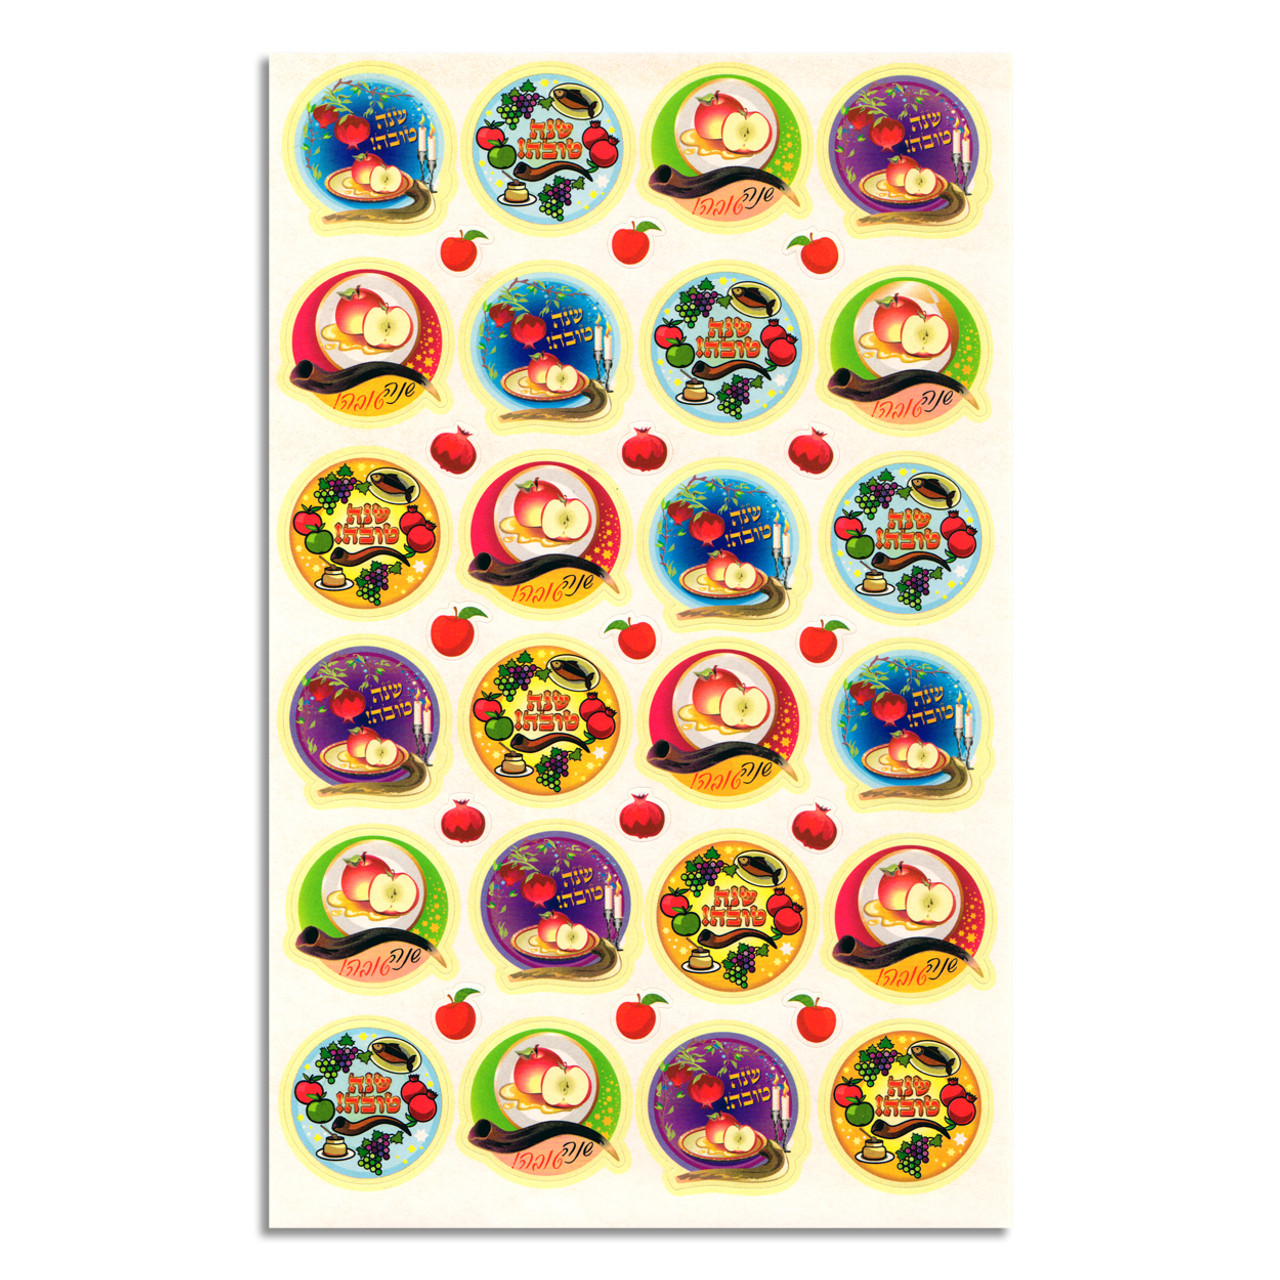 Shana Tovah Picture with Jewel Stickers - As low as $1.49 in Bulk, Rosh  HaShana Arts and Craft Project